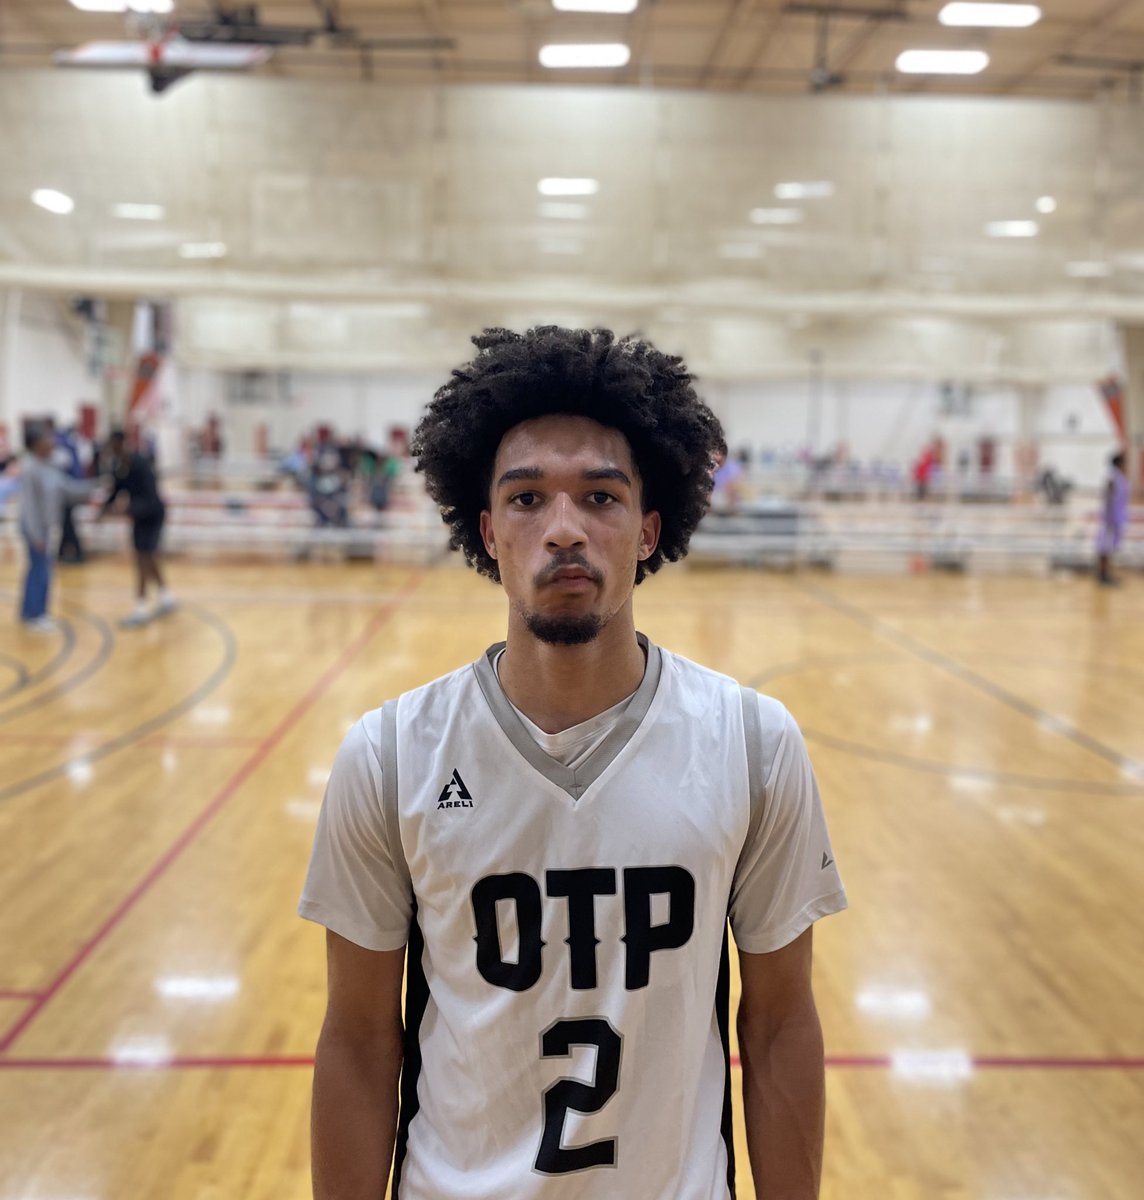 OTP National gets a win against Community Saved winning 65-53 to cap off Sunday night. Cade Lomas was great he put up 20 points and shot the ball very well. He had help from Jeremiah Shealey and Landon Duncan who both had 14 points.